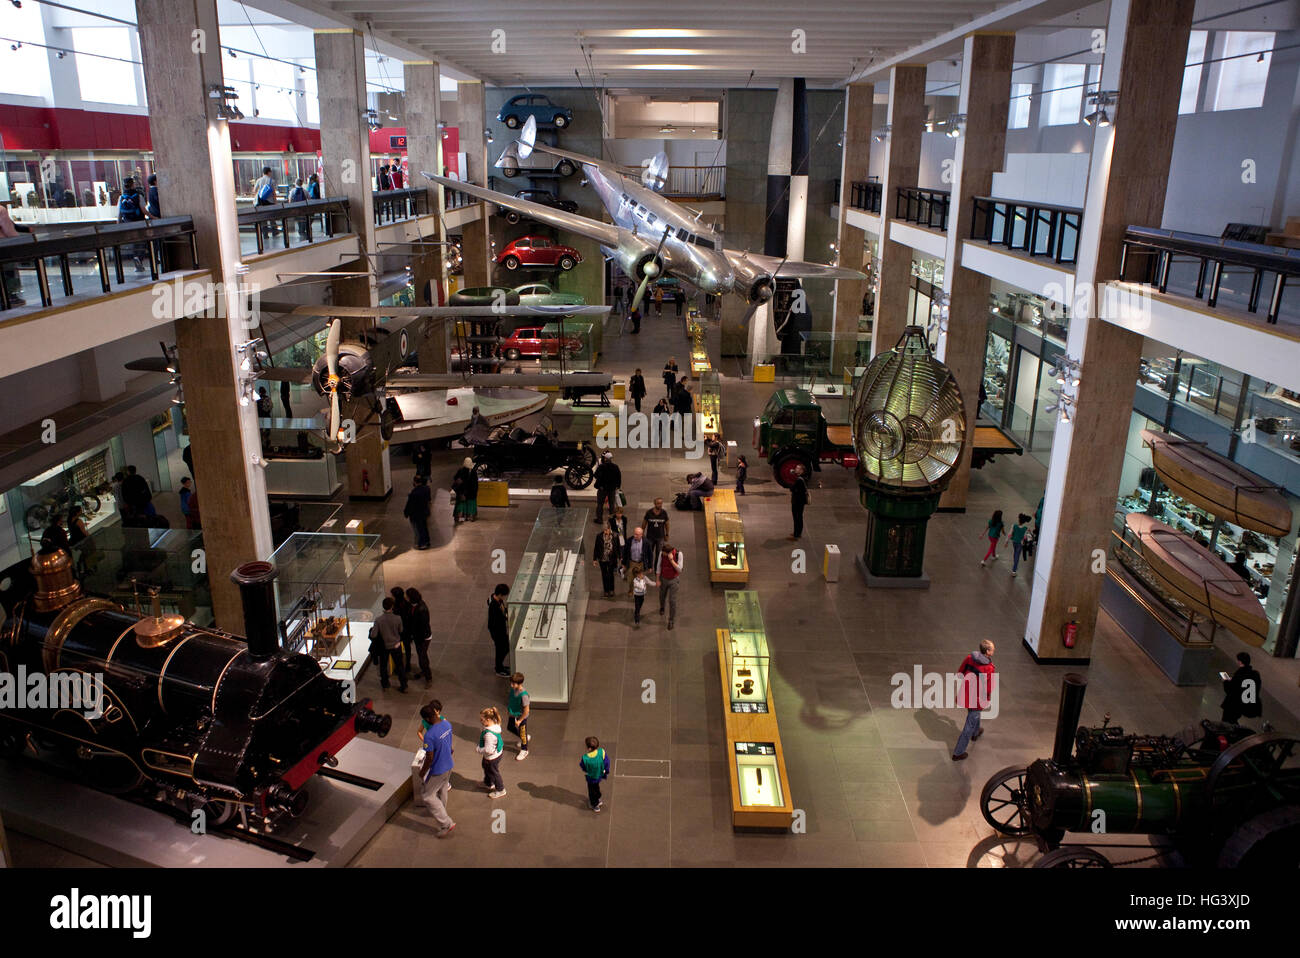 LONDON, UK - OCTOBER 22ND 2014: An interior shot of the Science Museum in London on 22nd October 2014. Stock Photo